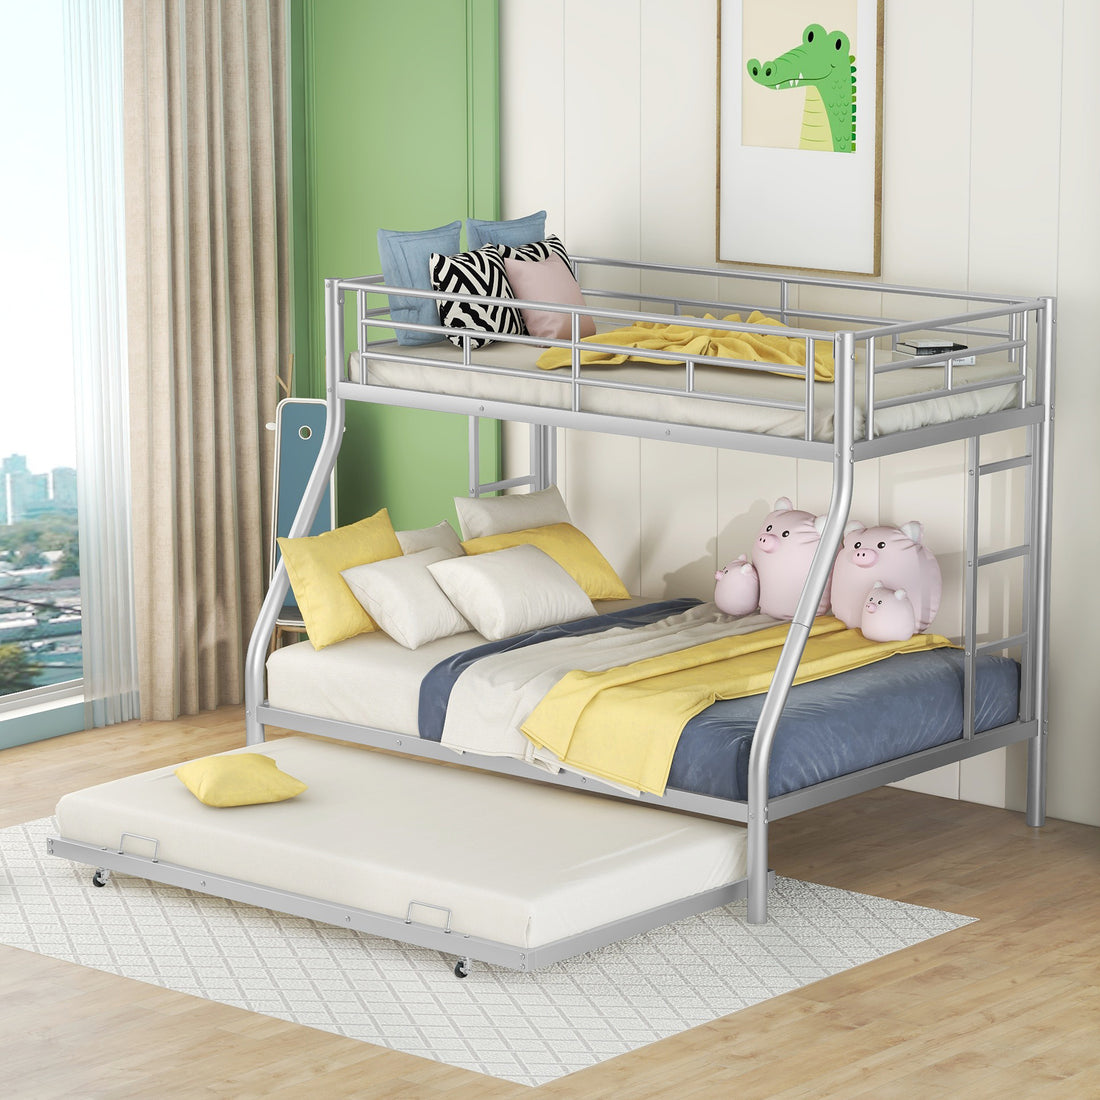 Twin Over Full Bed With Sturdy Steel Frame, Bunk